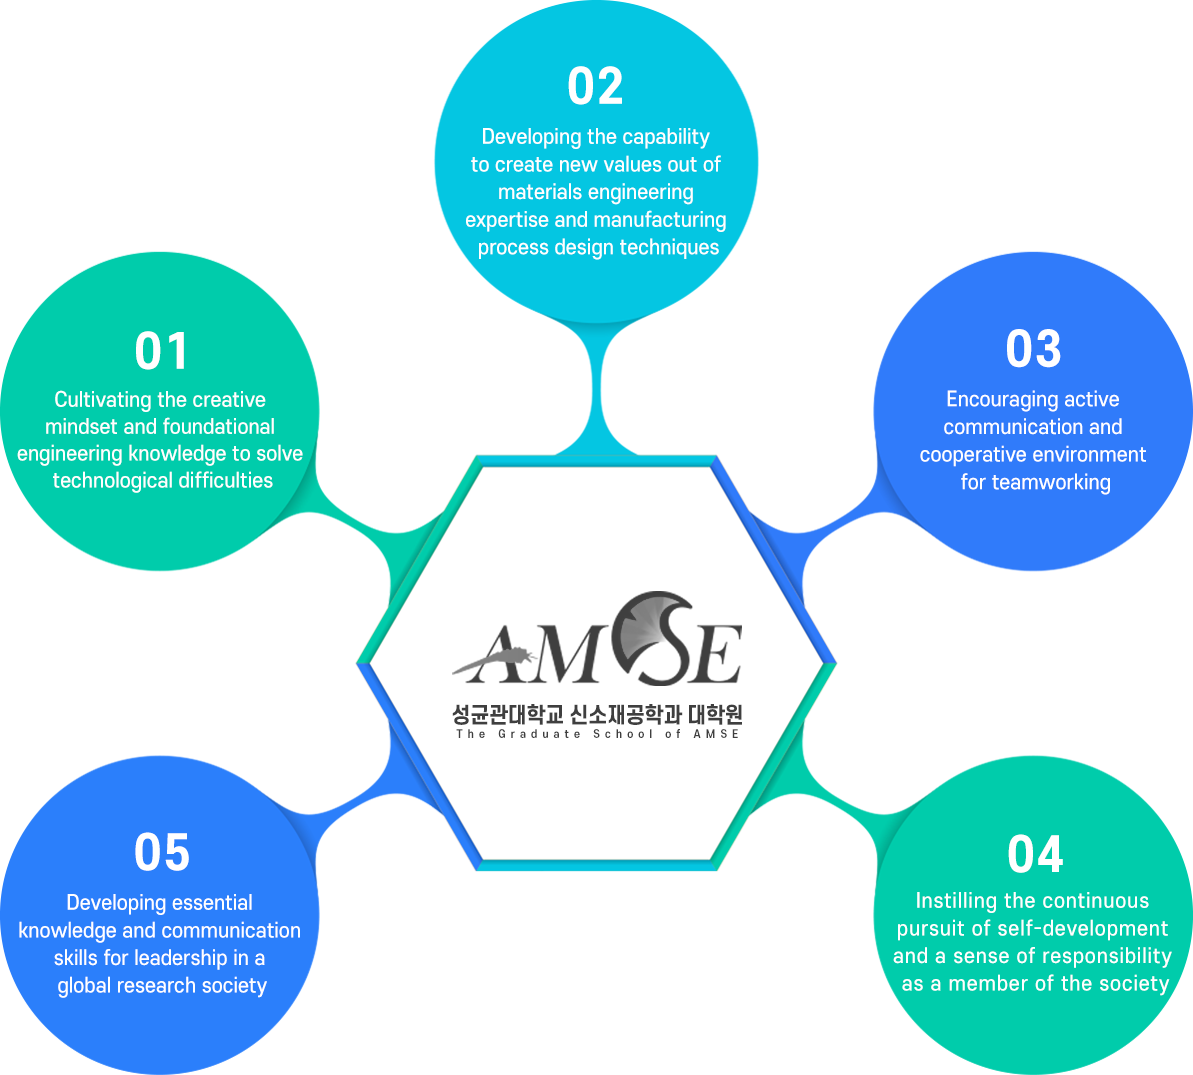 About AMSE